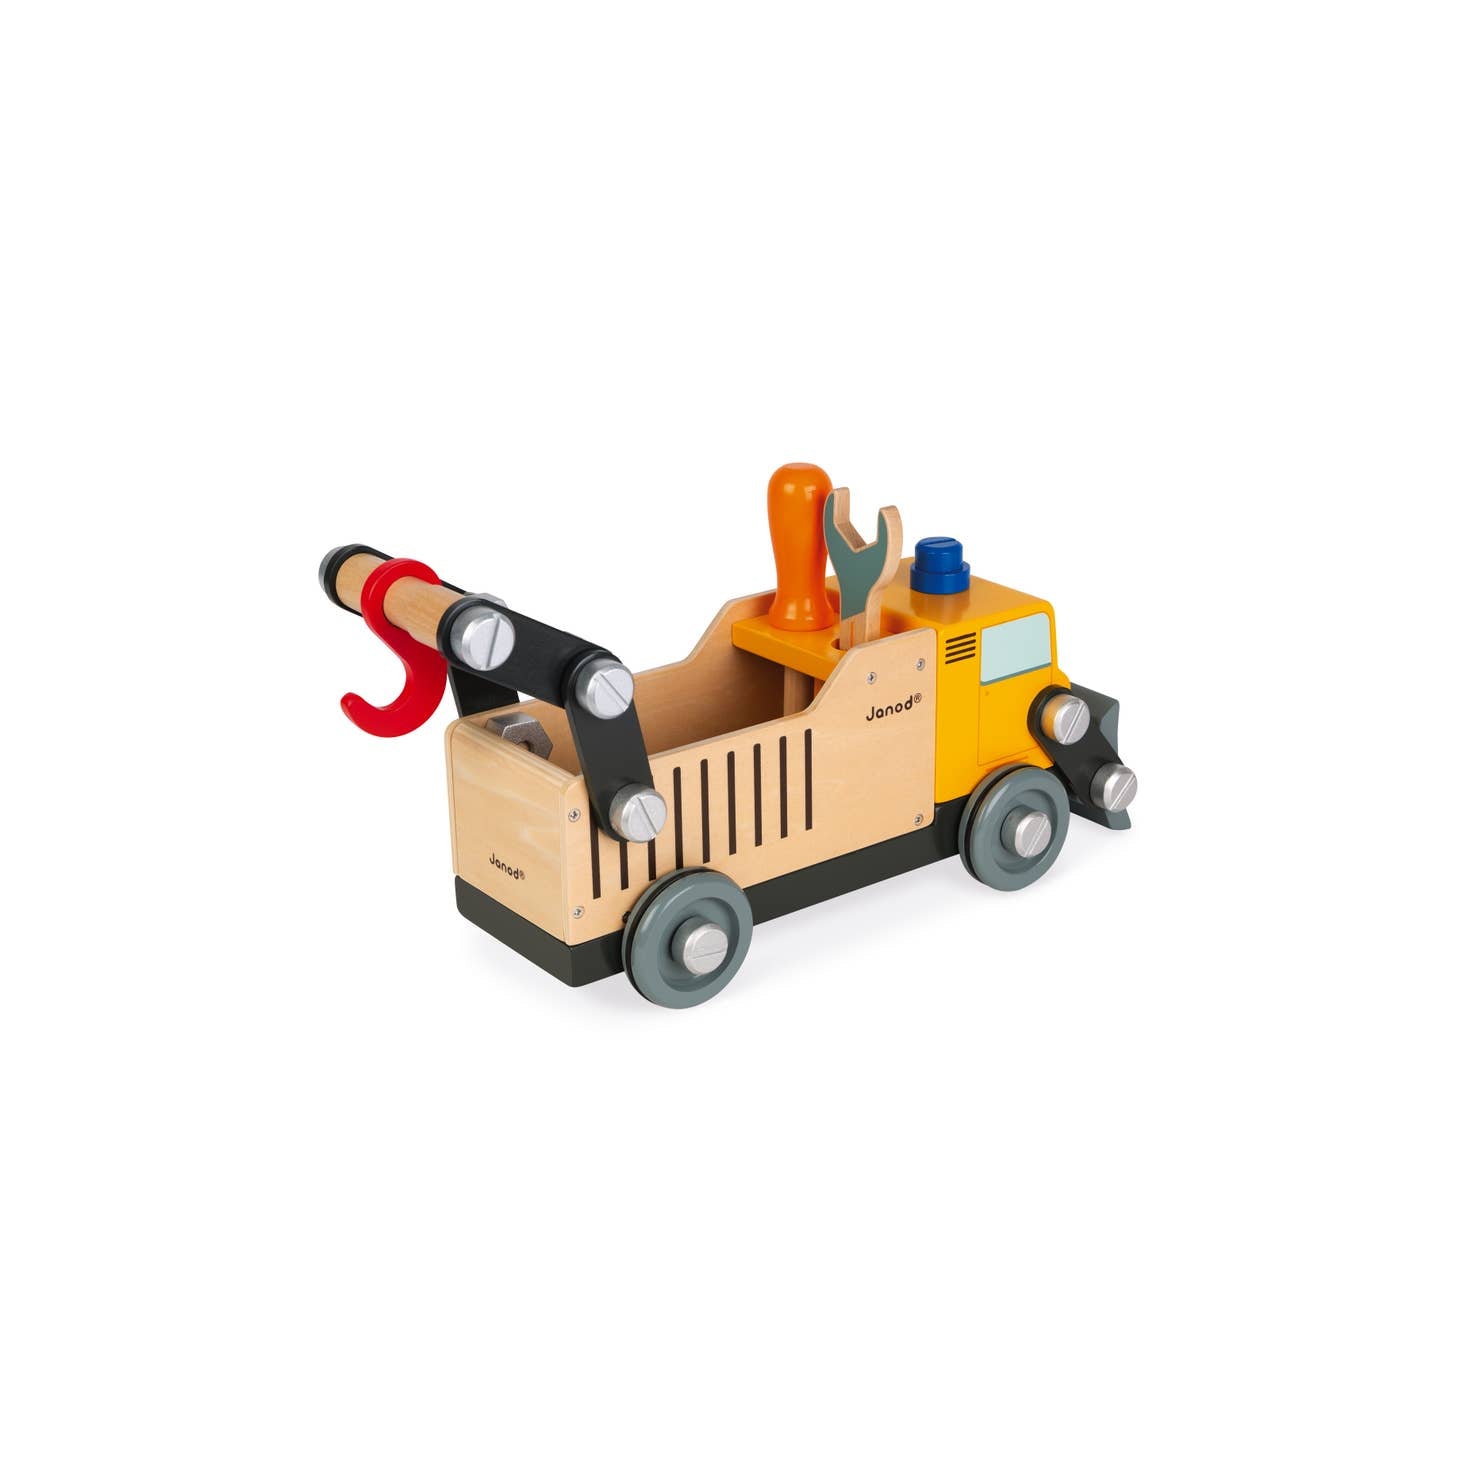 janod brico kids construction truck / 2 toys in 1: a construction game to reassemble a magnificent construction lorry using the many nuts, plates and screws provided. Once assembled, children can let their imaginations run wild to create grand adventures with this fully- fledged toy!